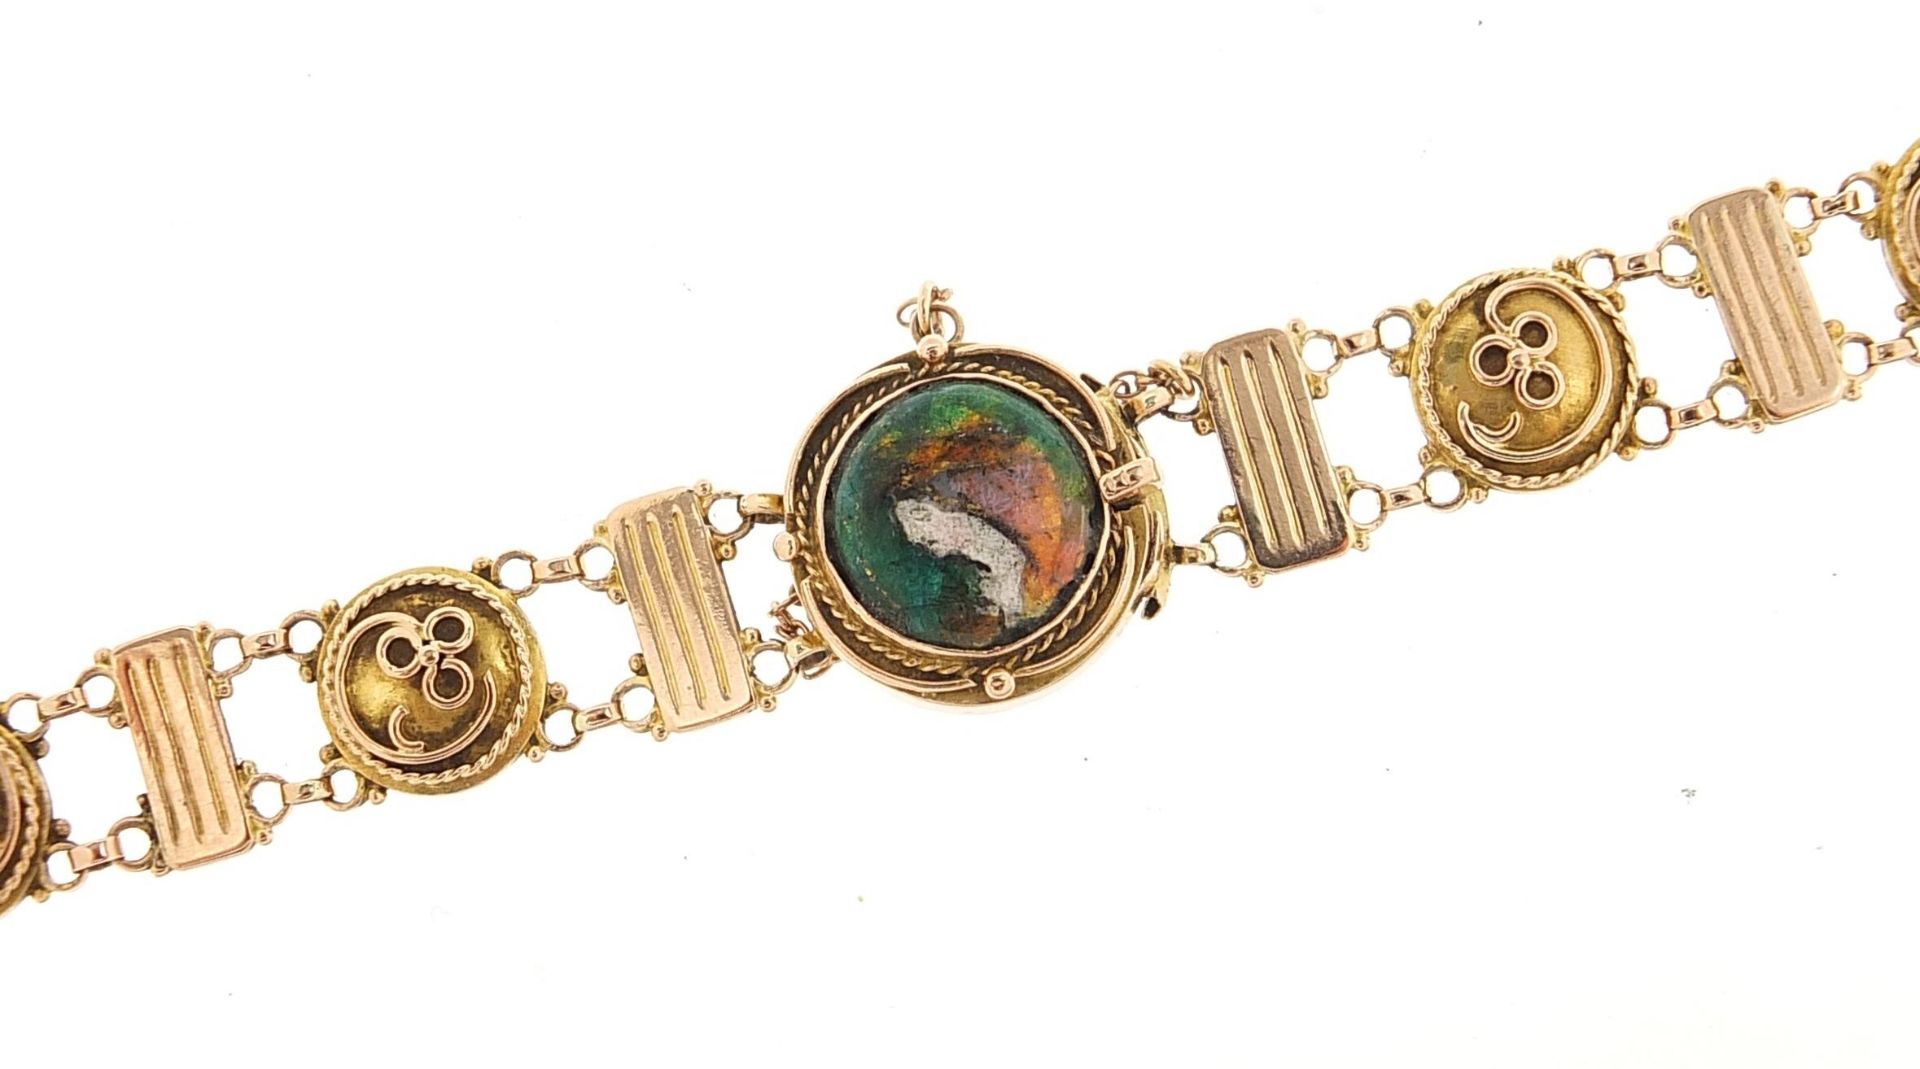 Manner of Liberty & Co, Art Nouveau unmarked gold and enamel bracelet decorated with a female, tests